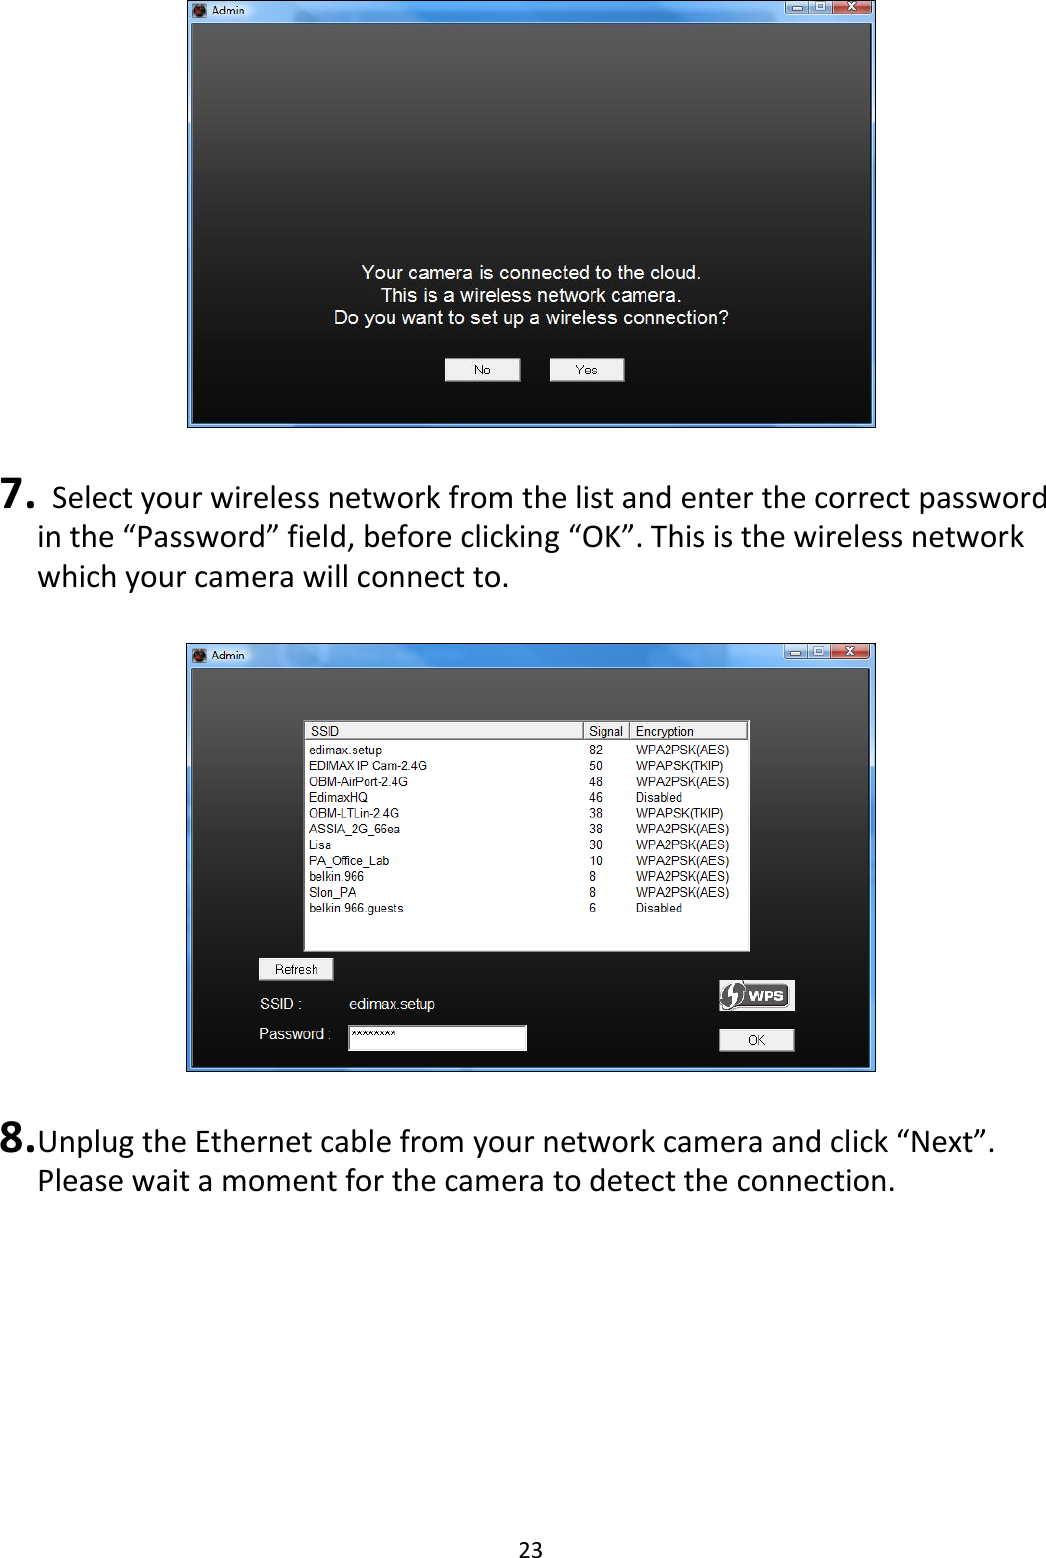 23    7.   Select your wireless network from the list and enter the correct password in the “Password” field, before clicking “OK”. This is the wireless network which your camera will connect to.    8. Unplug the Ethernet cable from your network camera and click “Next”. Please wait a moment for the camera to detect the connection.  